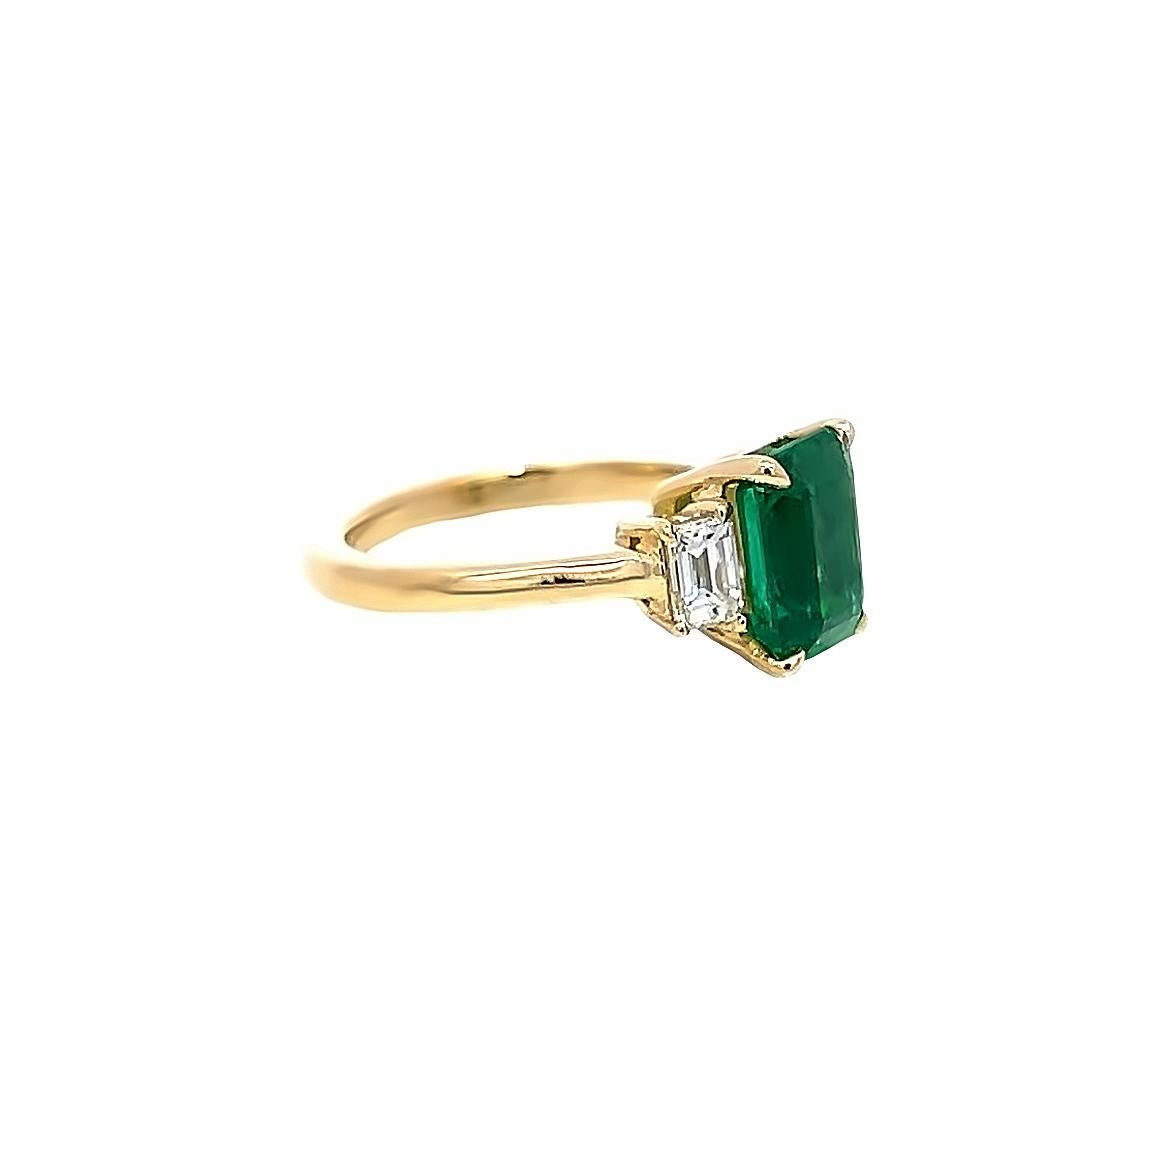 This exquisite ring boasts a gorgeous octagonal Emerald, originating from Zambia and certified by GIA for its transparency. The emerald is accompanied by two diamonds, each 0.40CT in weight, adding up to a total diamond weight of 0.80CT. The